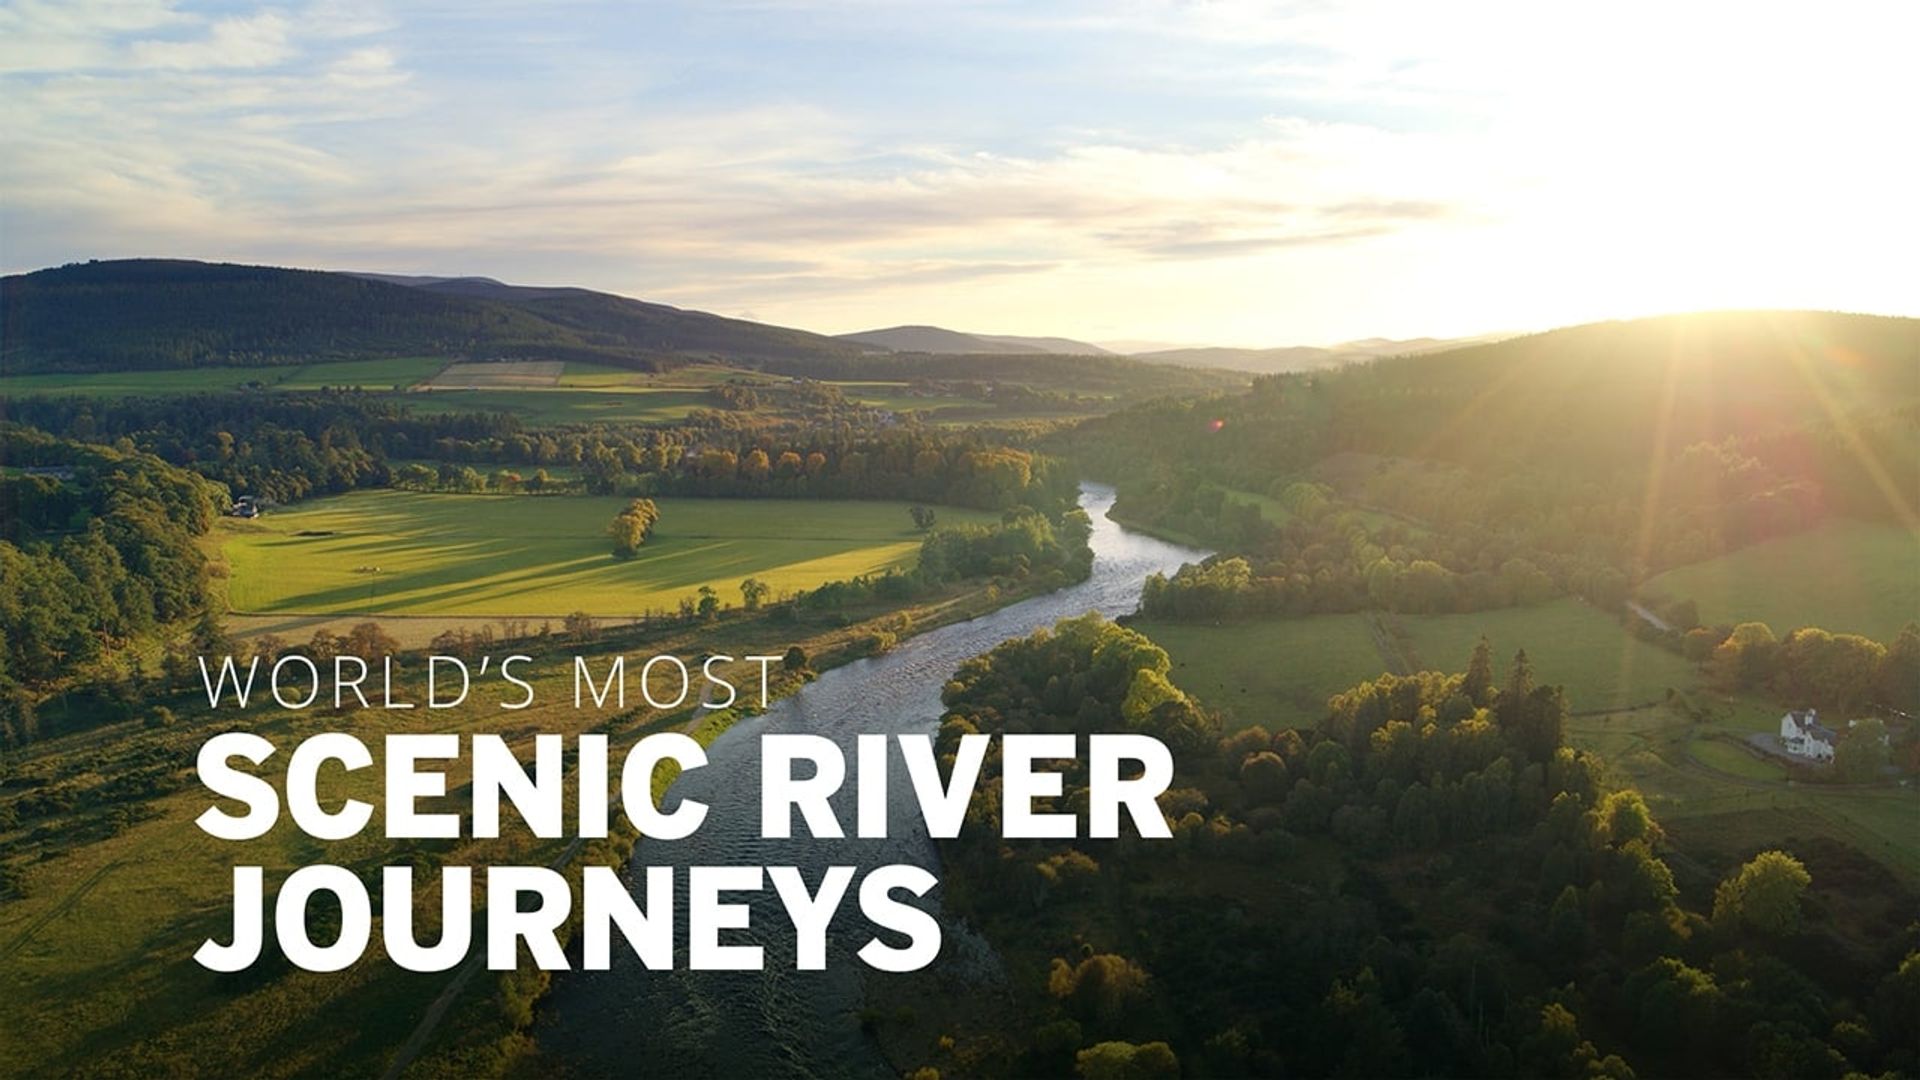 World's Most Scenic River Journeys background